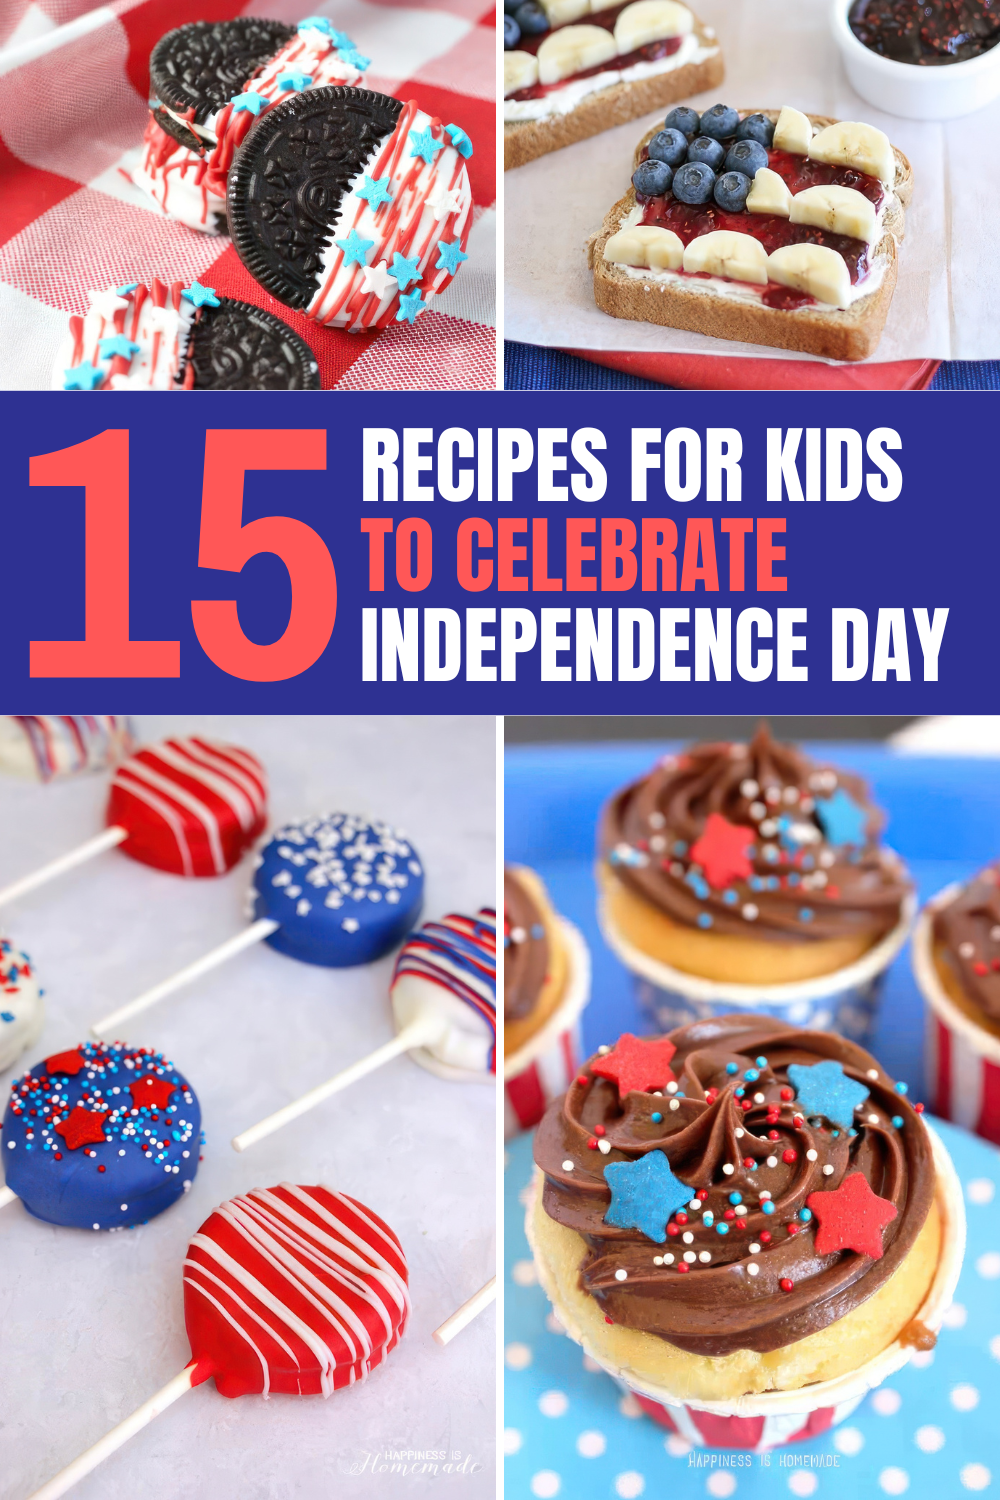 Celebrate the 4th of July with these delicious and simple recipes that kids can make! From colorful cupcakes to patriotic popsicles, these red, white, and blue treats are perfect for the holiday. Tap to see all the tasty ideas! 🎆🍦🍰